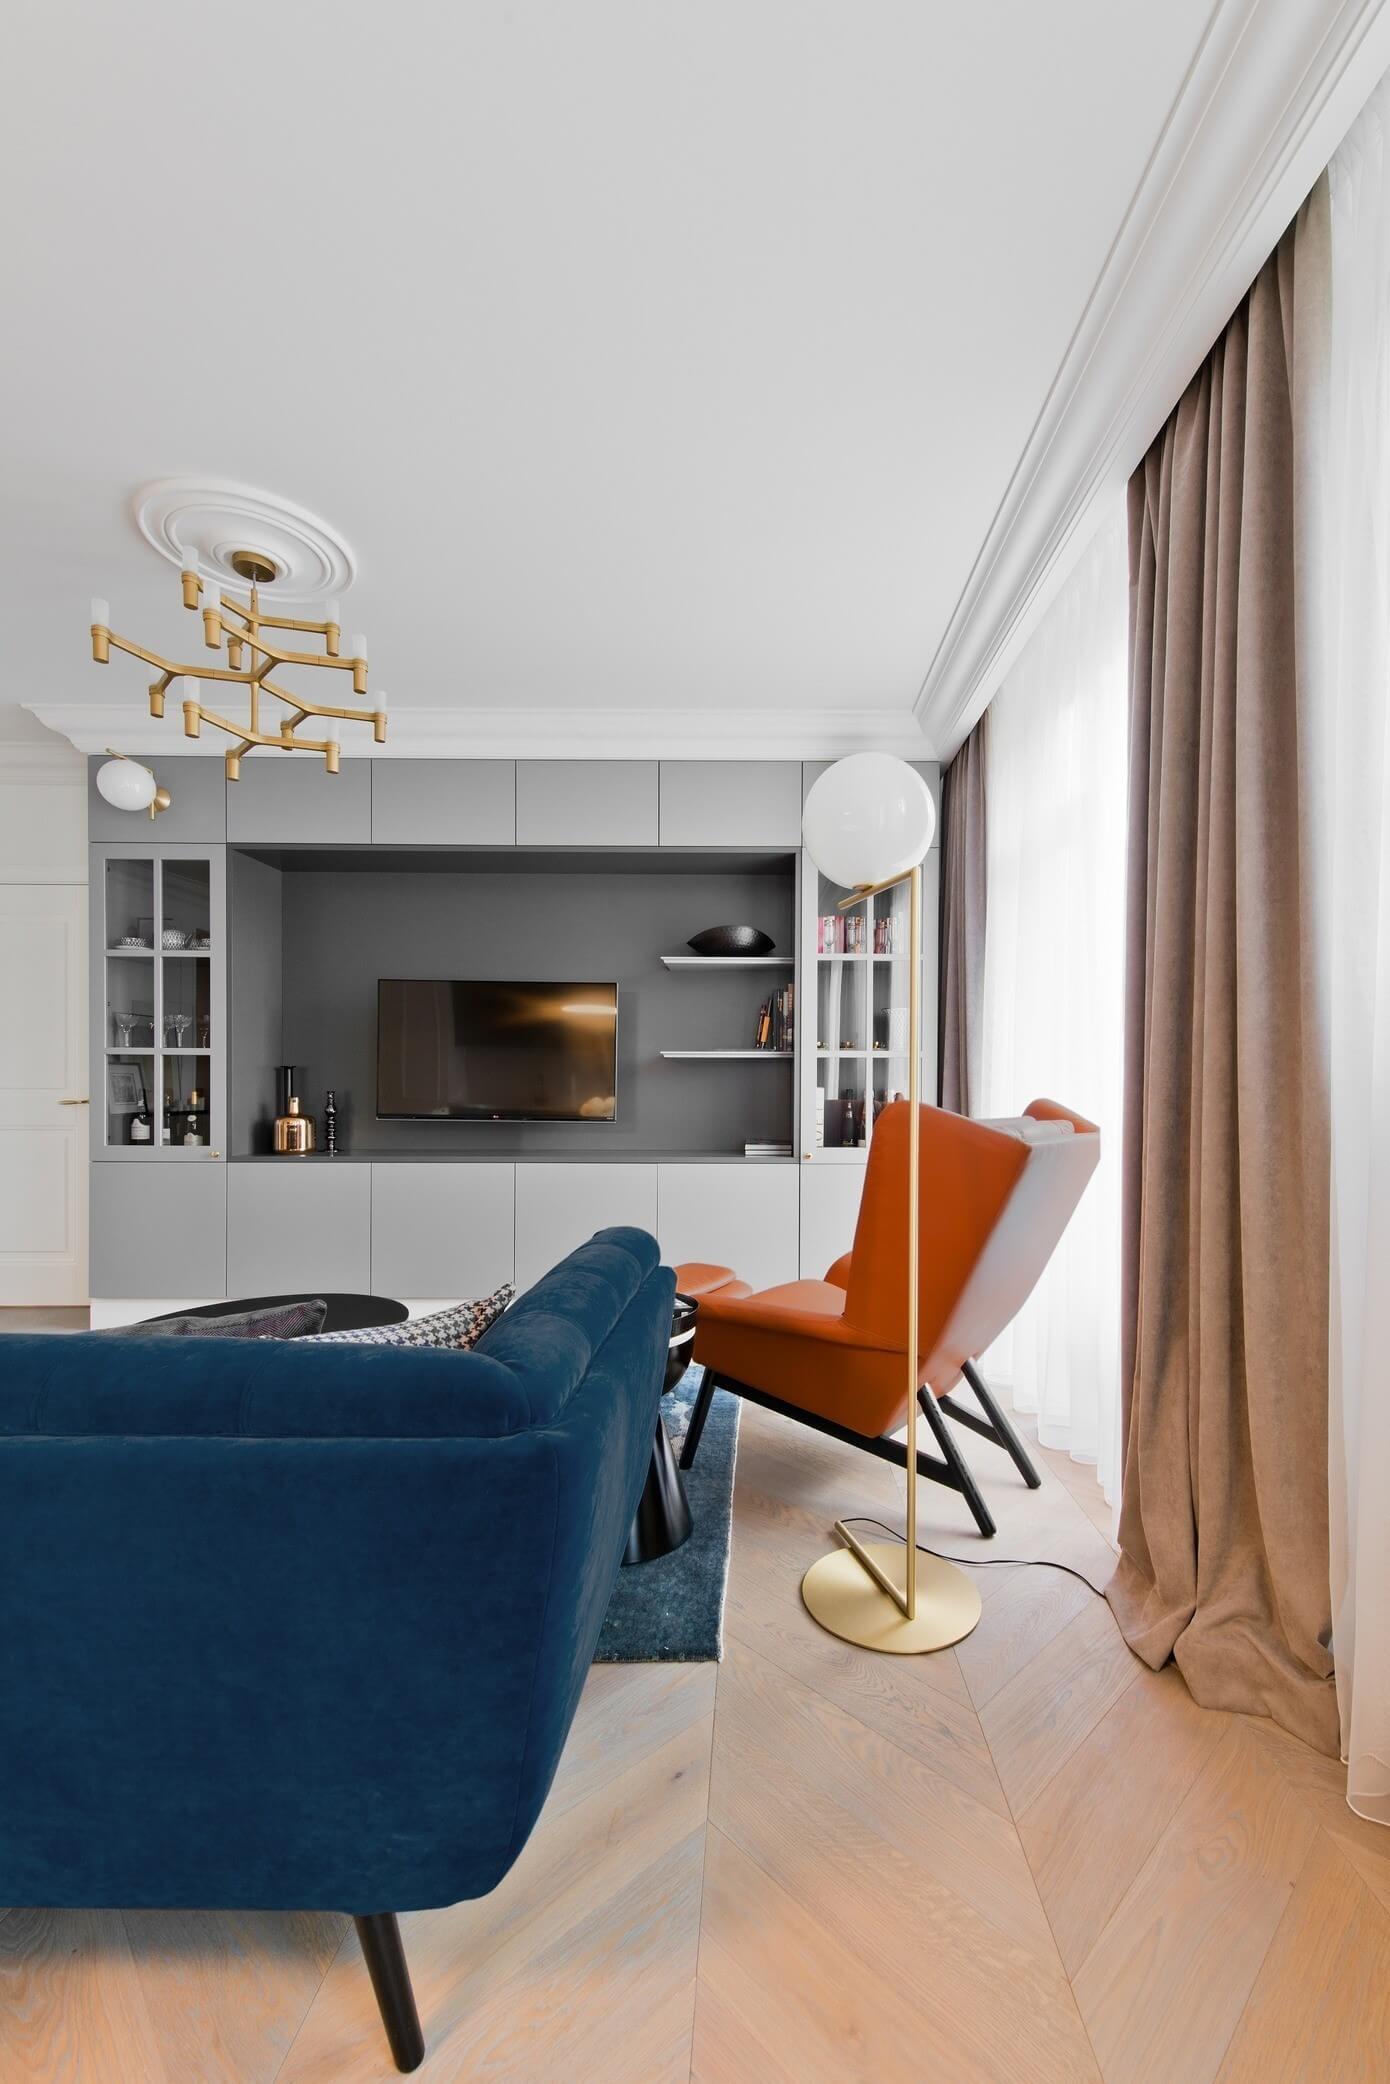 Apartment in Vilnius by Indre Sunklodiene